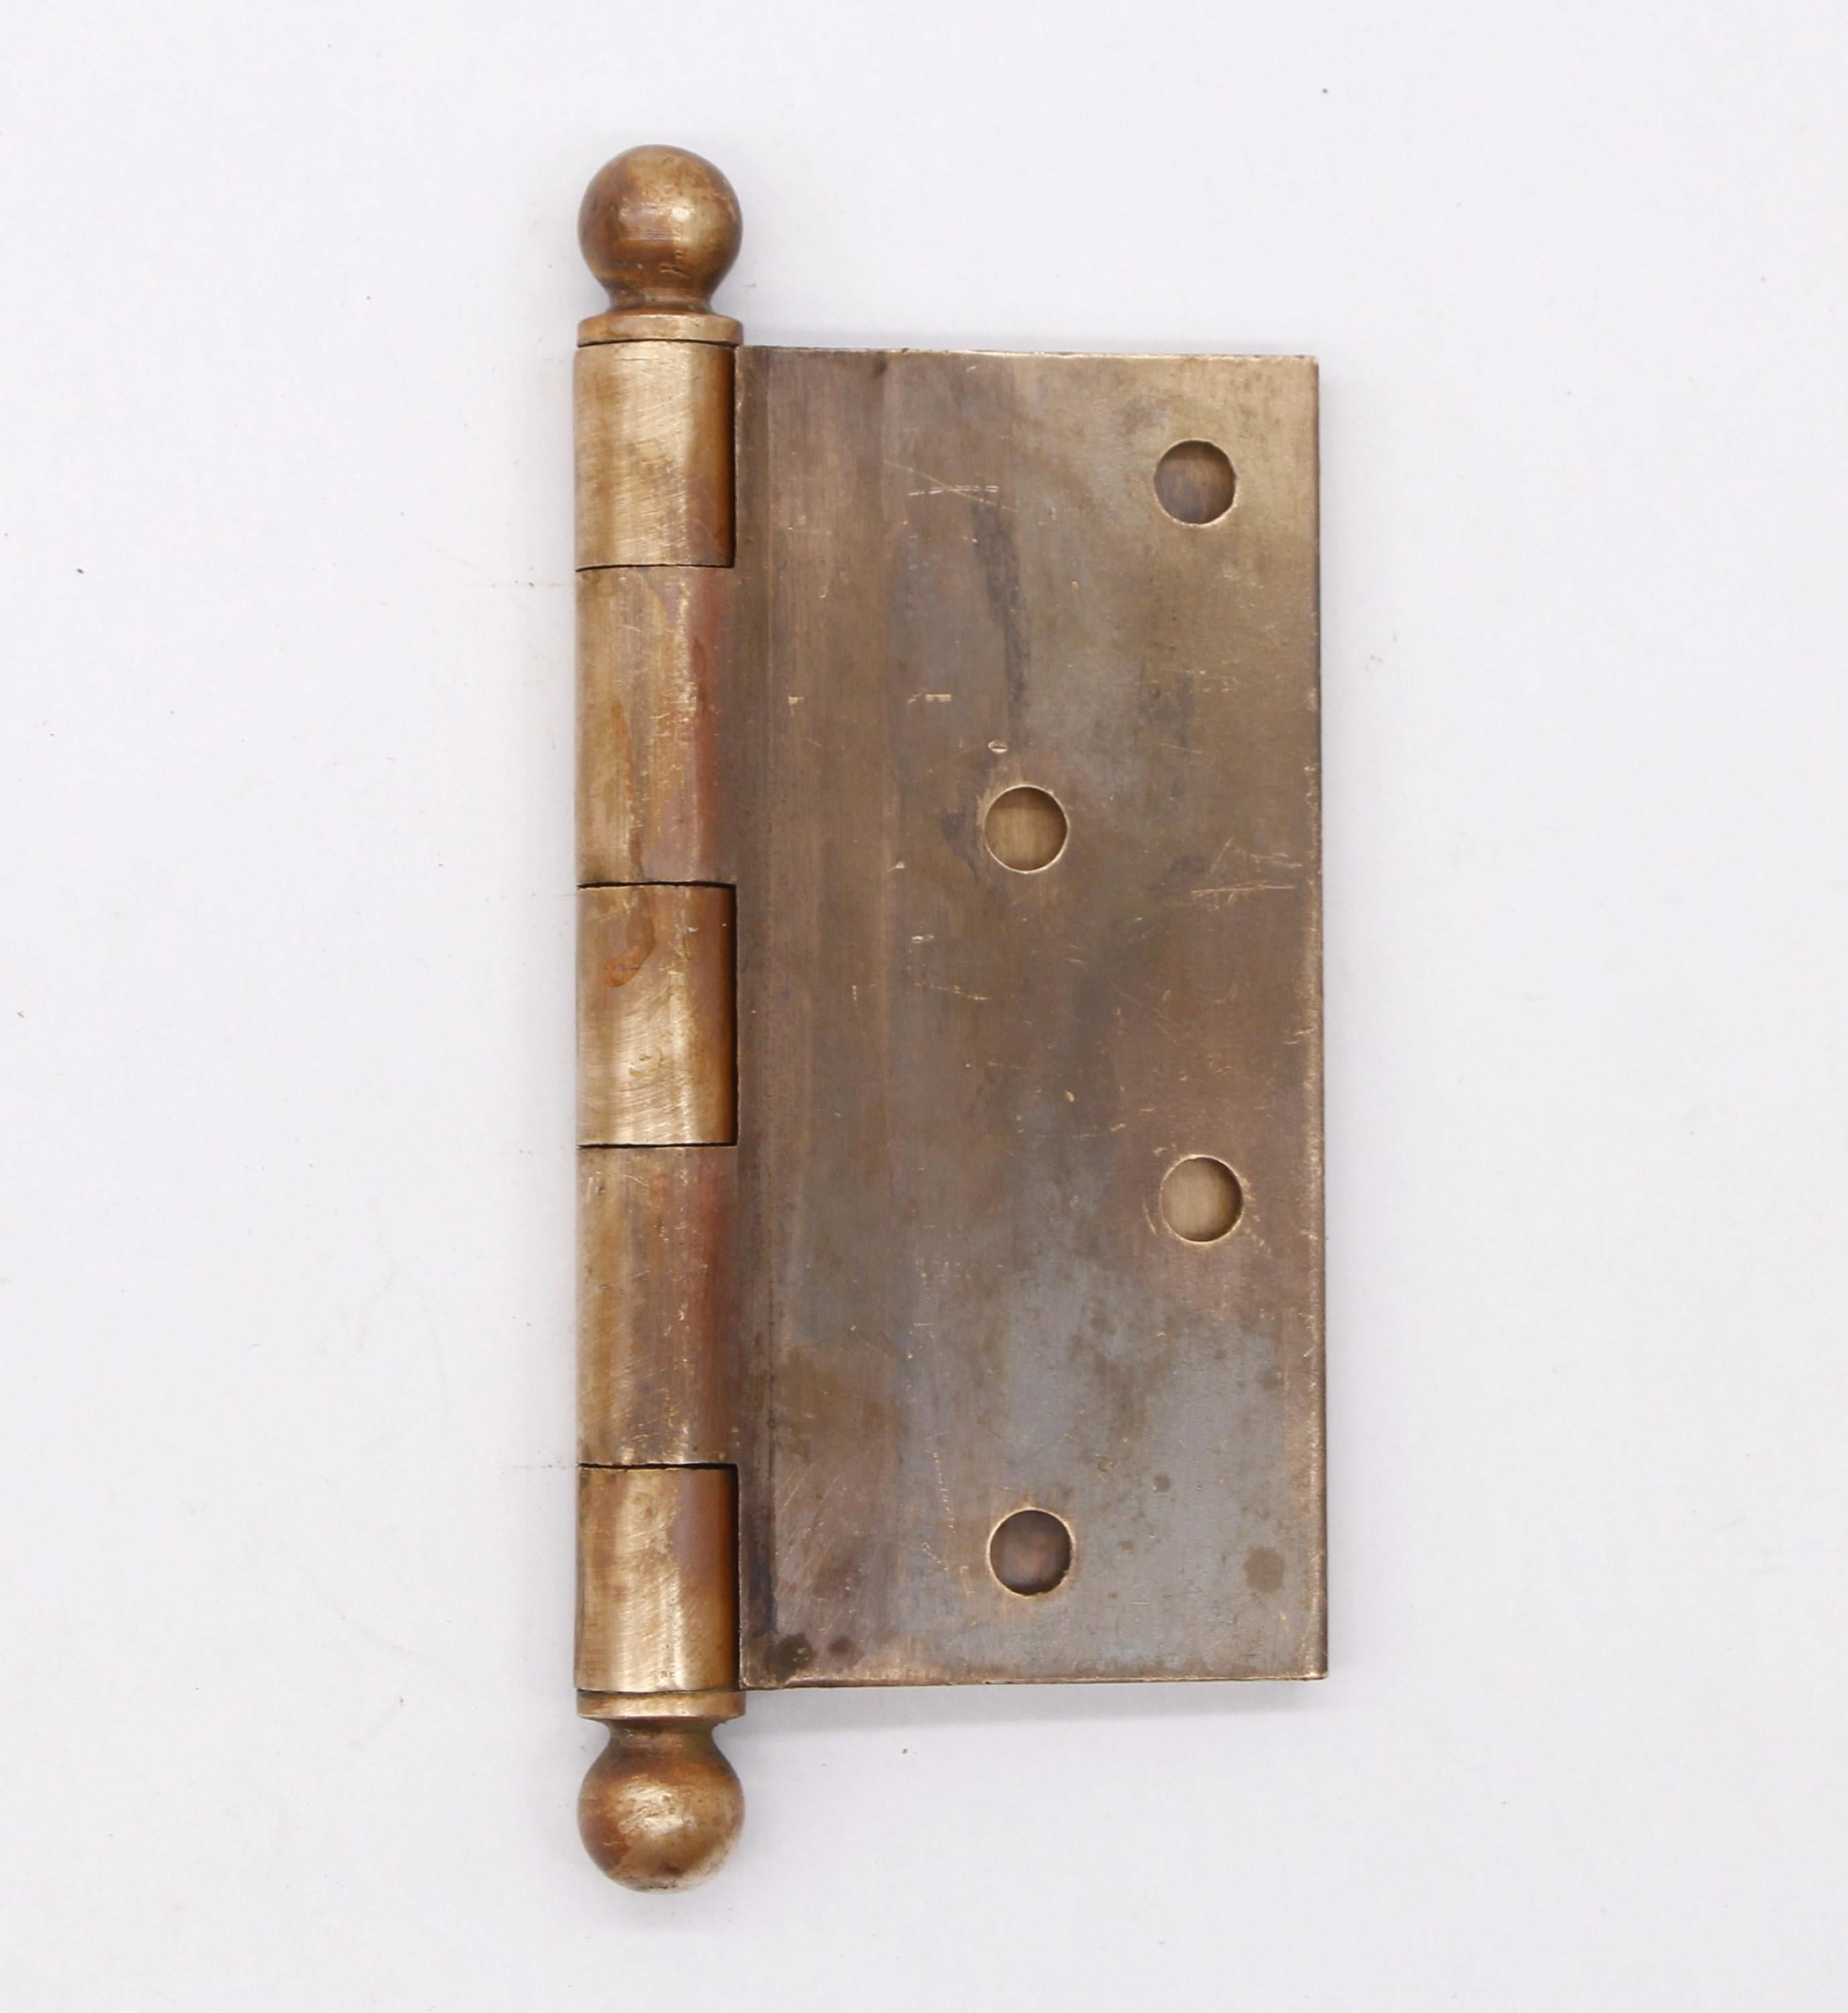 The vintage brass ball tip butt door hinge is commonly used on residential and commercial doors, providing smooth operation and a classic touch of elegance to any space. This is made of brass with ball tips, five knuckles, and a staggered hole